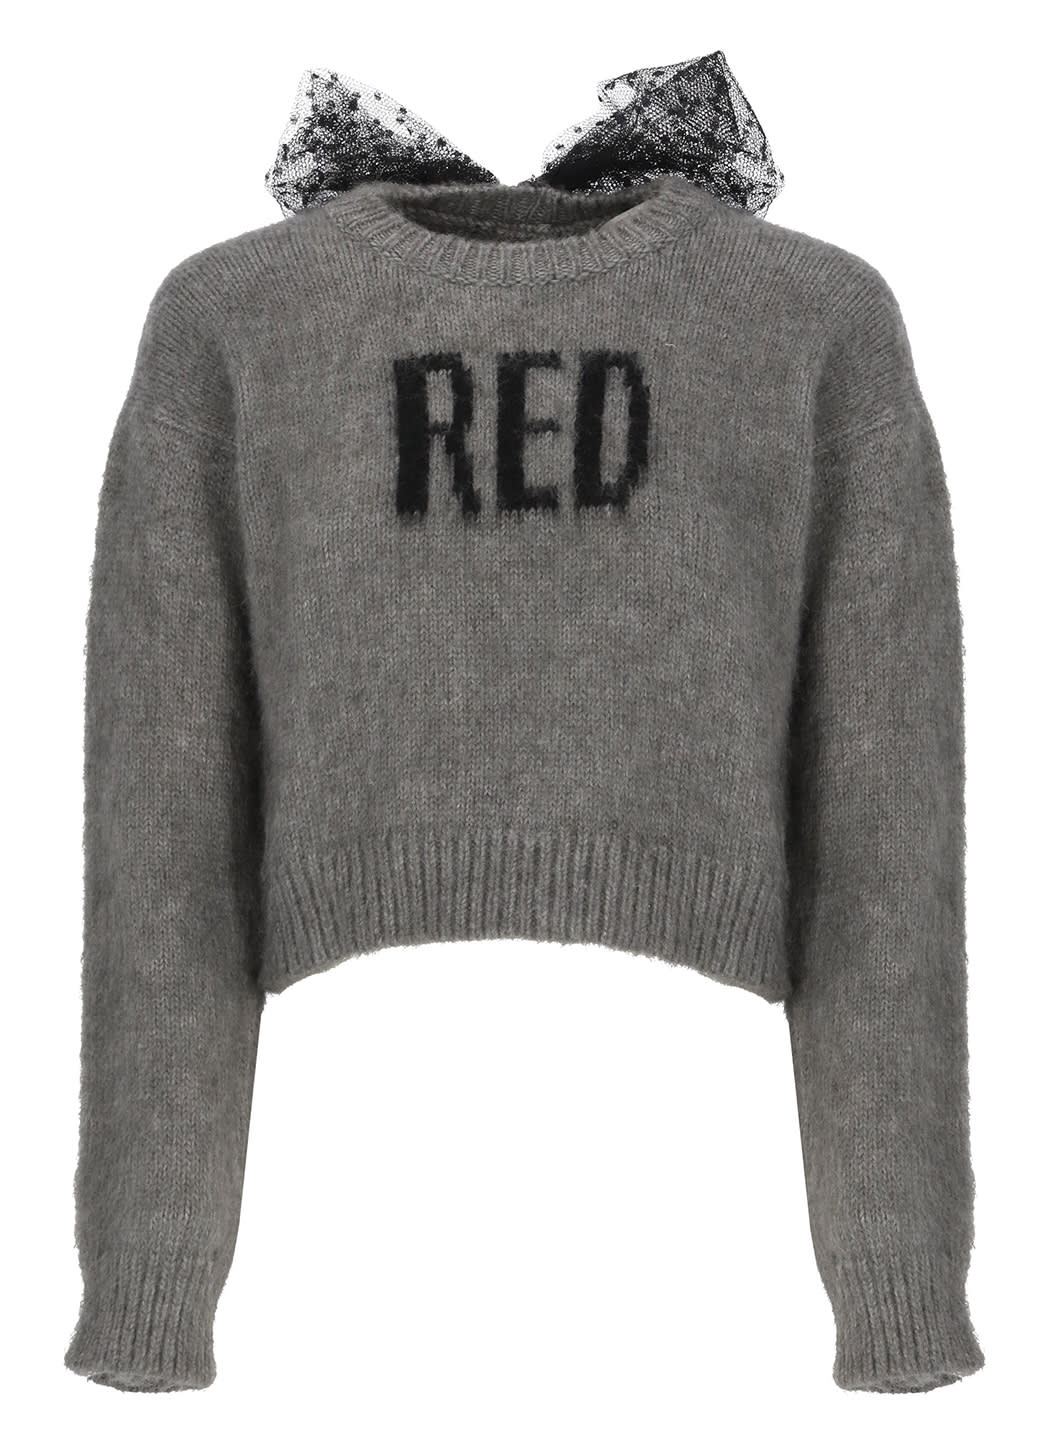 RED VALENTINO CROPPED SWEATER WITH LOGO